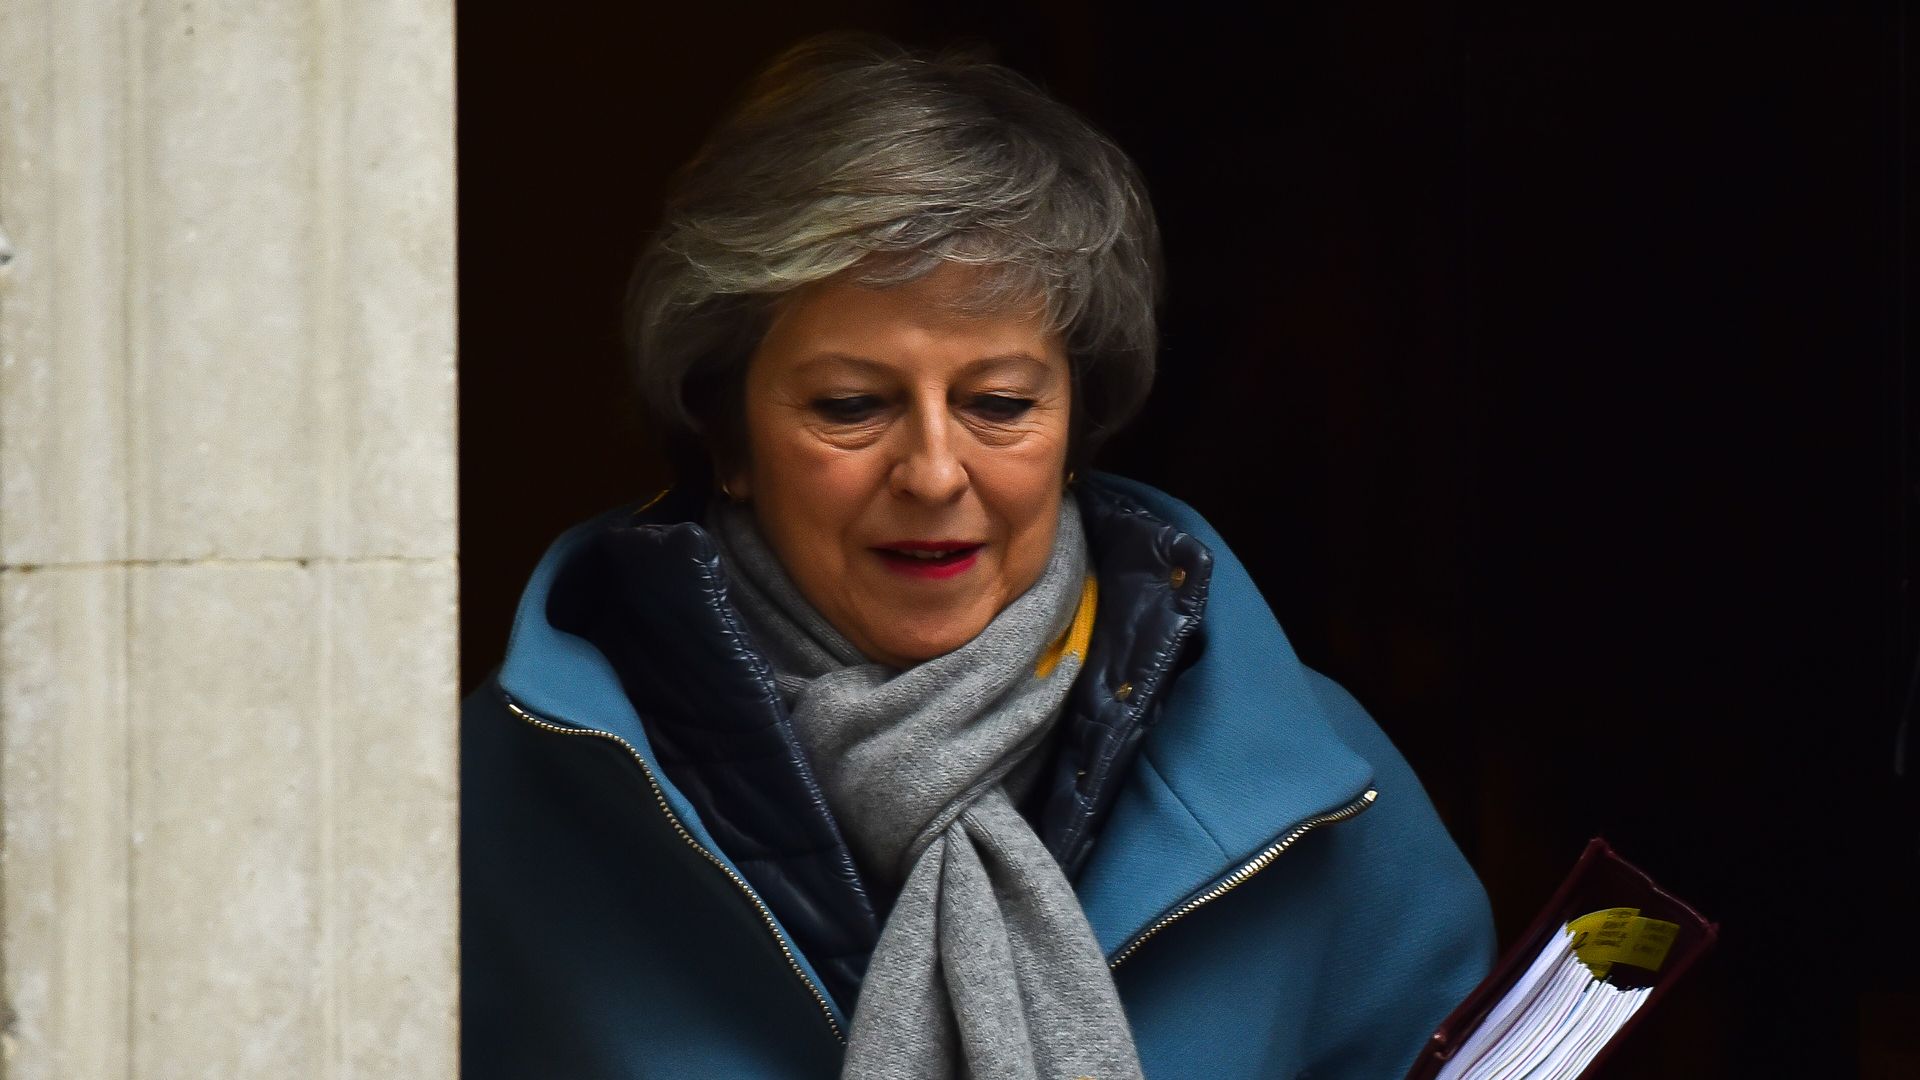 British Prime Minister Theresa May leaves 10 Downing Street to attend the weekly Prime Minister's Questions, London on January 9, 2019. 